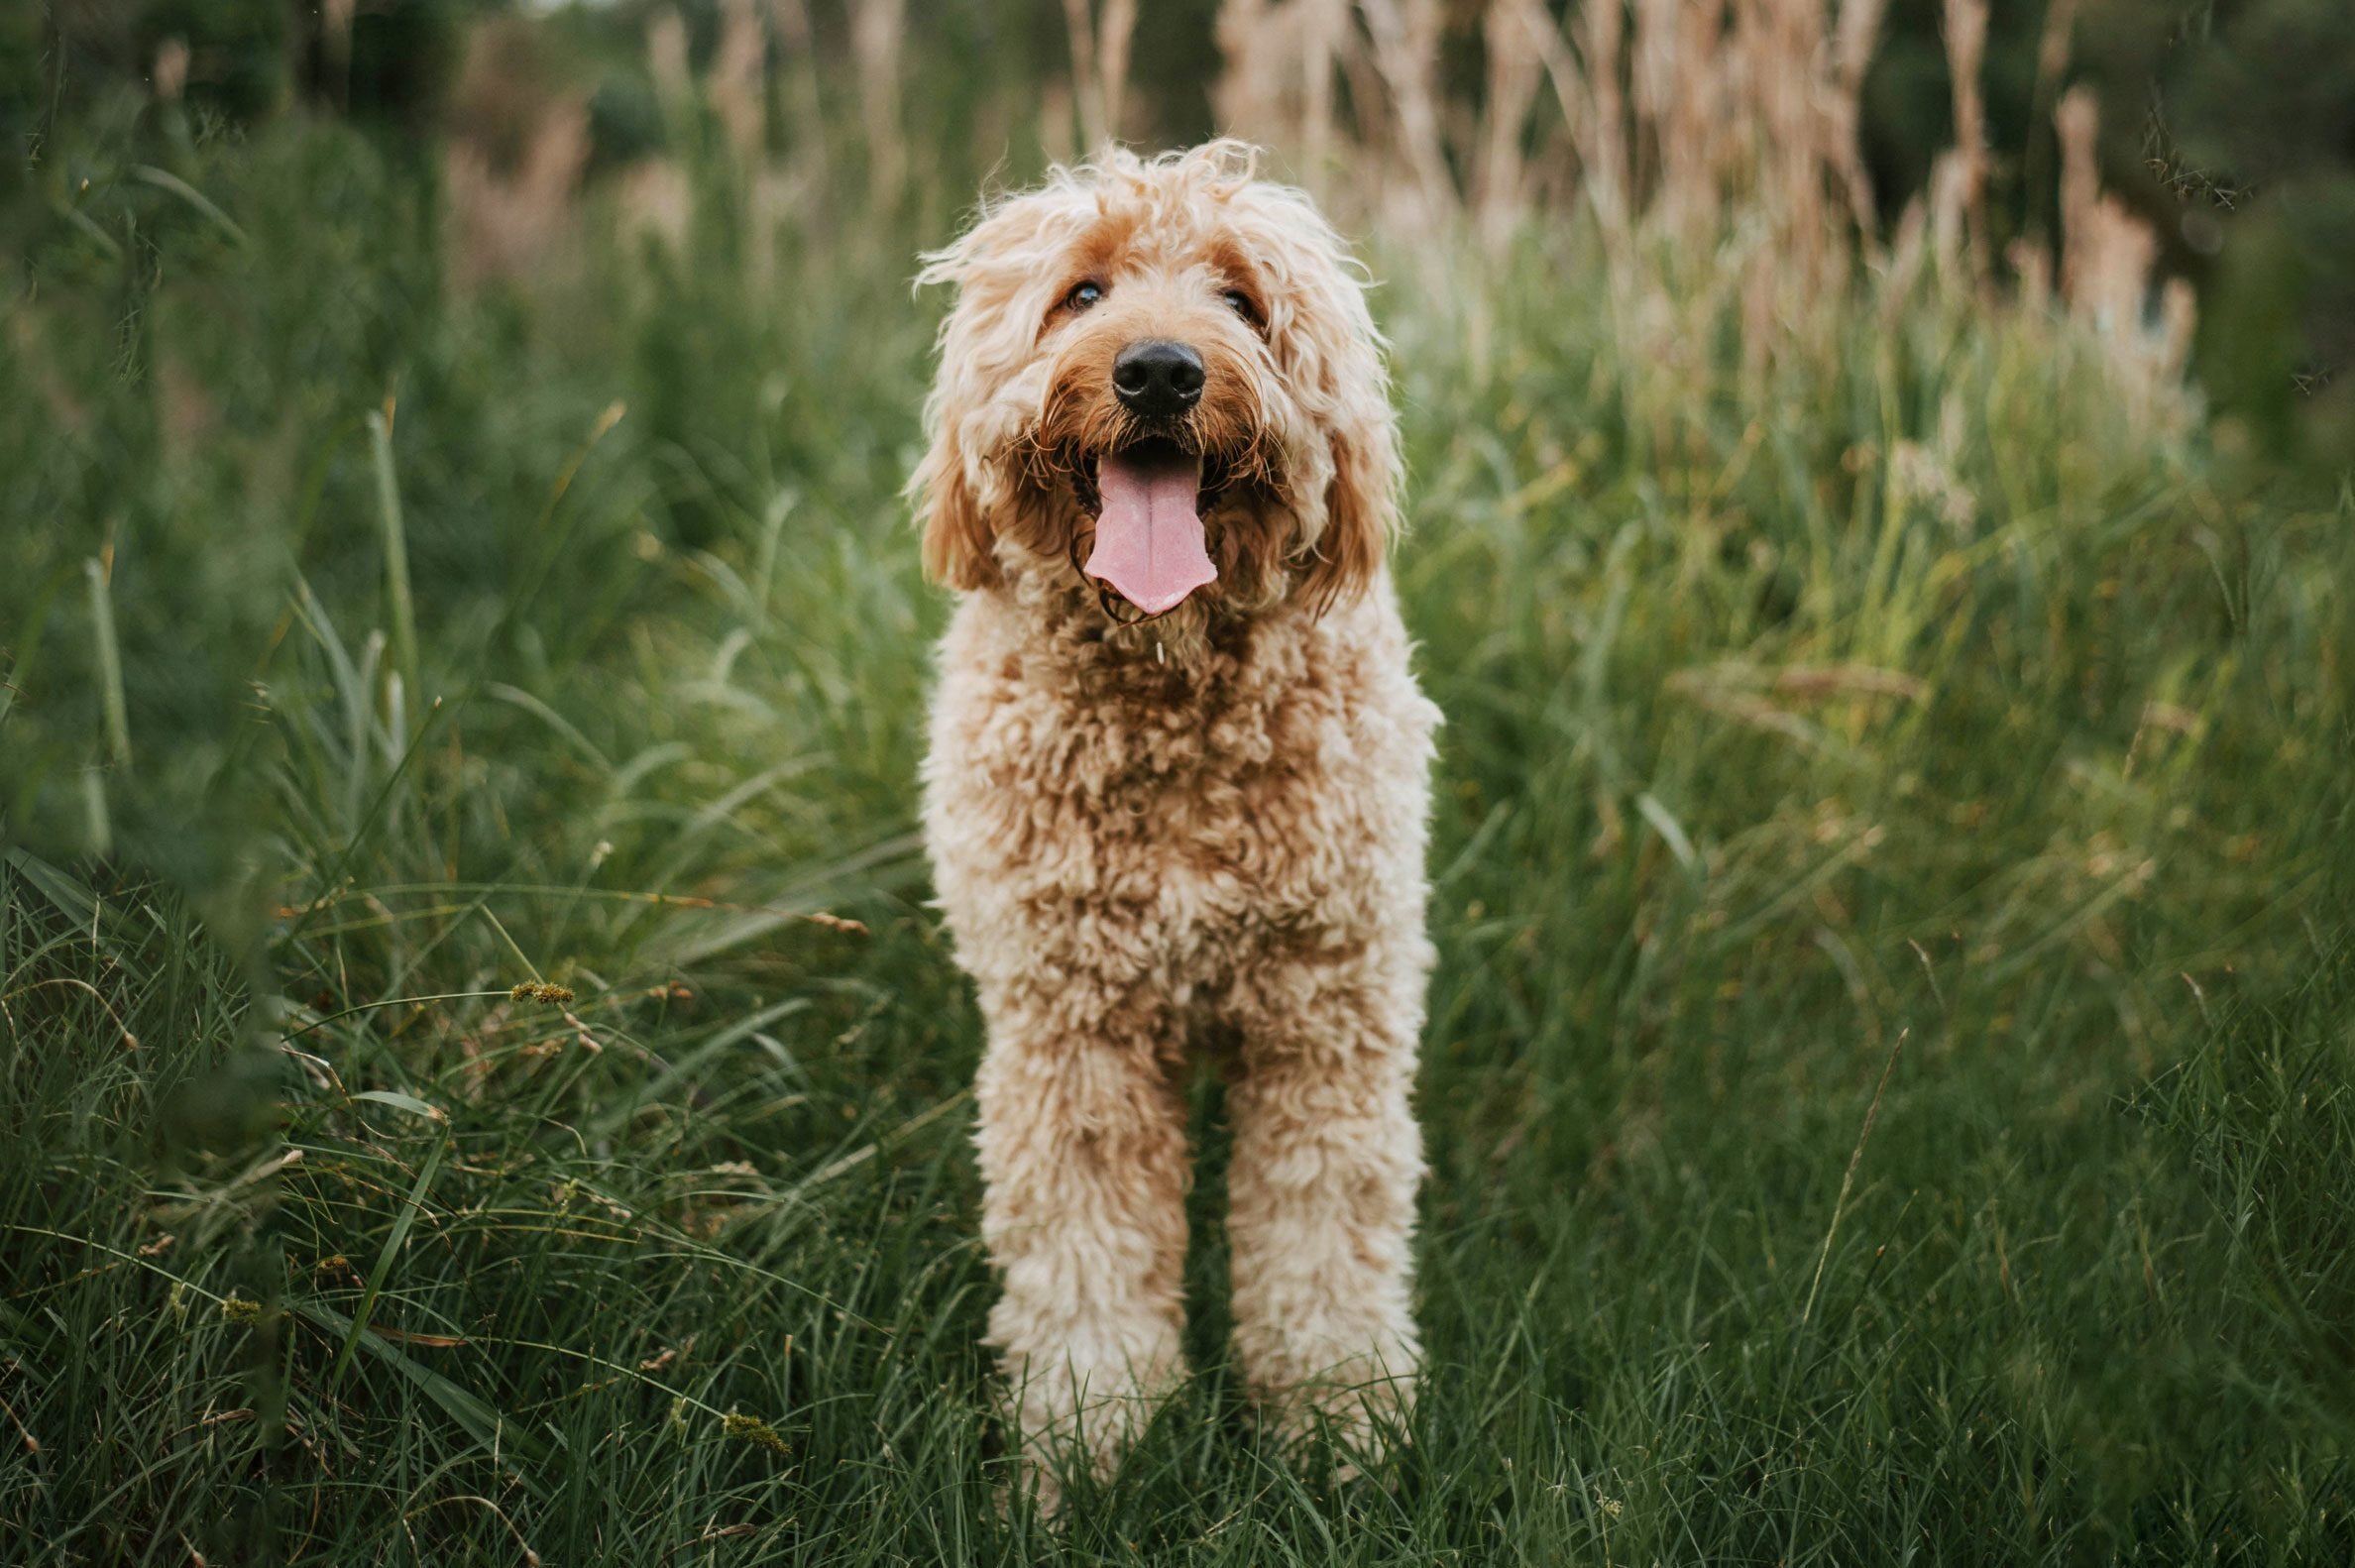 Is a Goldendoodle a Good House Dog? You Bet - Here's Why